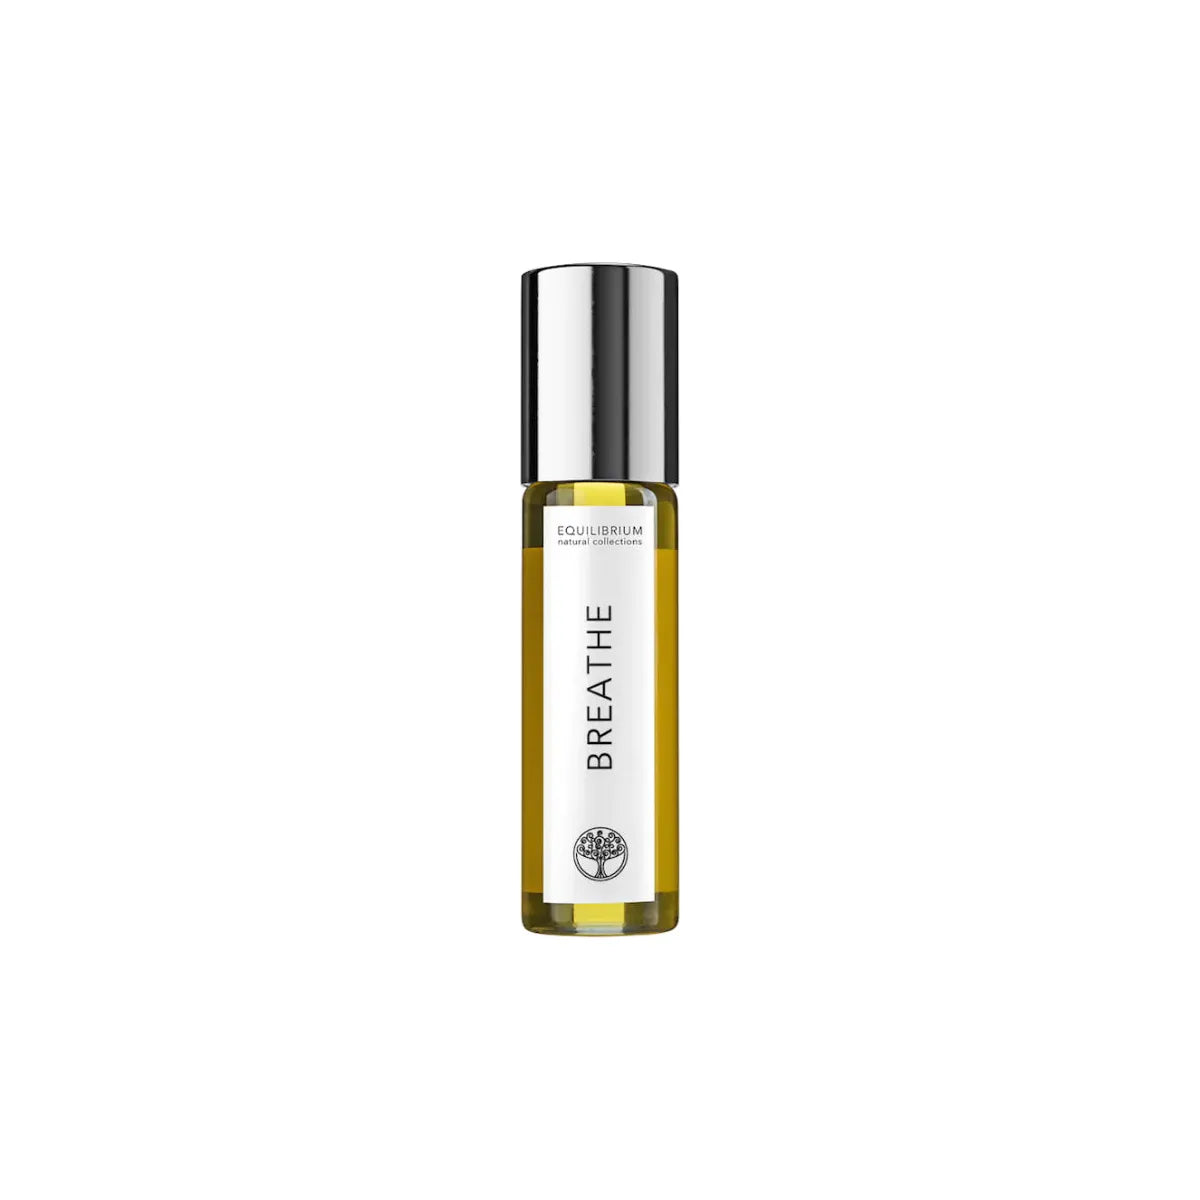 Equilibrium Natural Collections Perfume Therapy Oil: Breathe